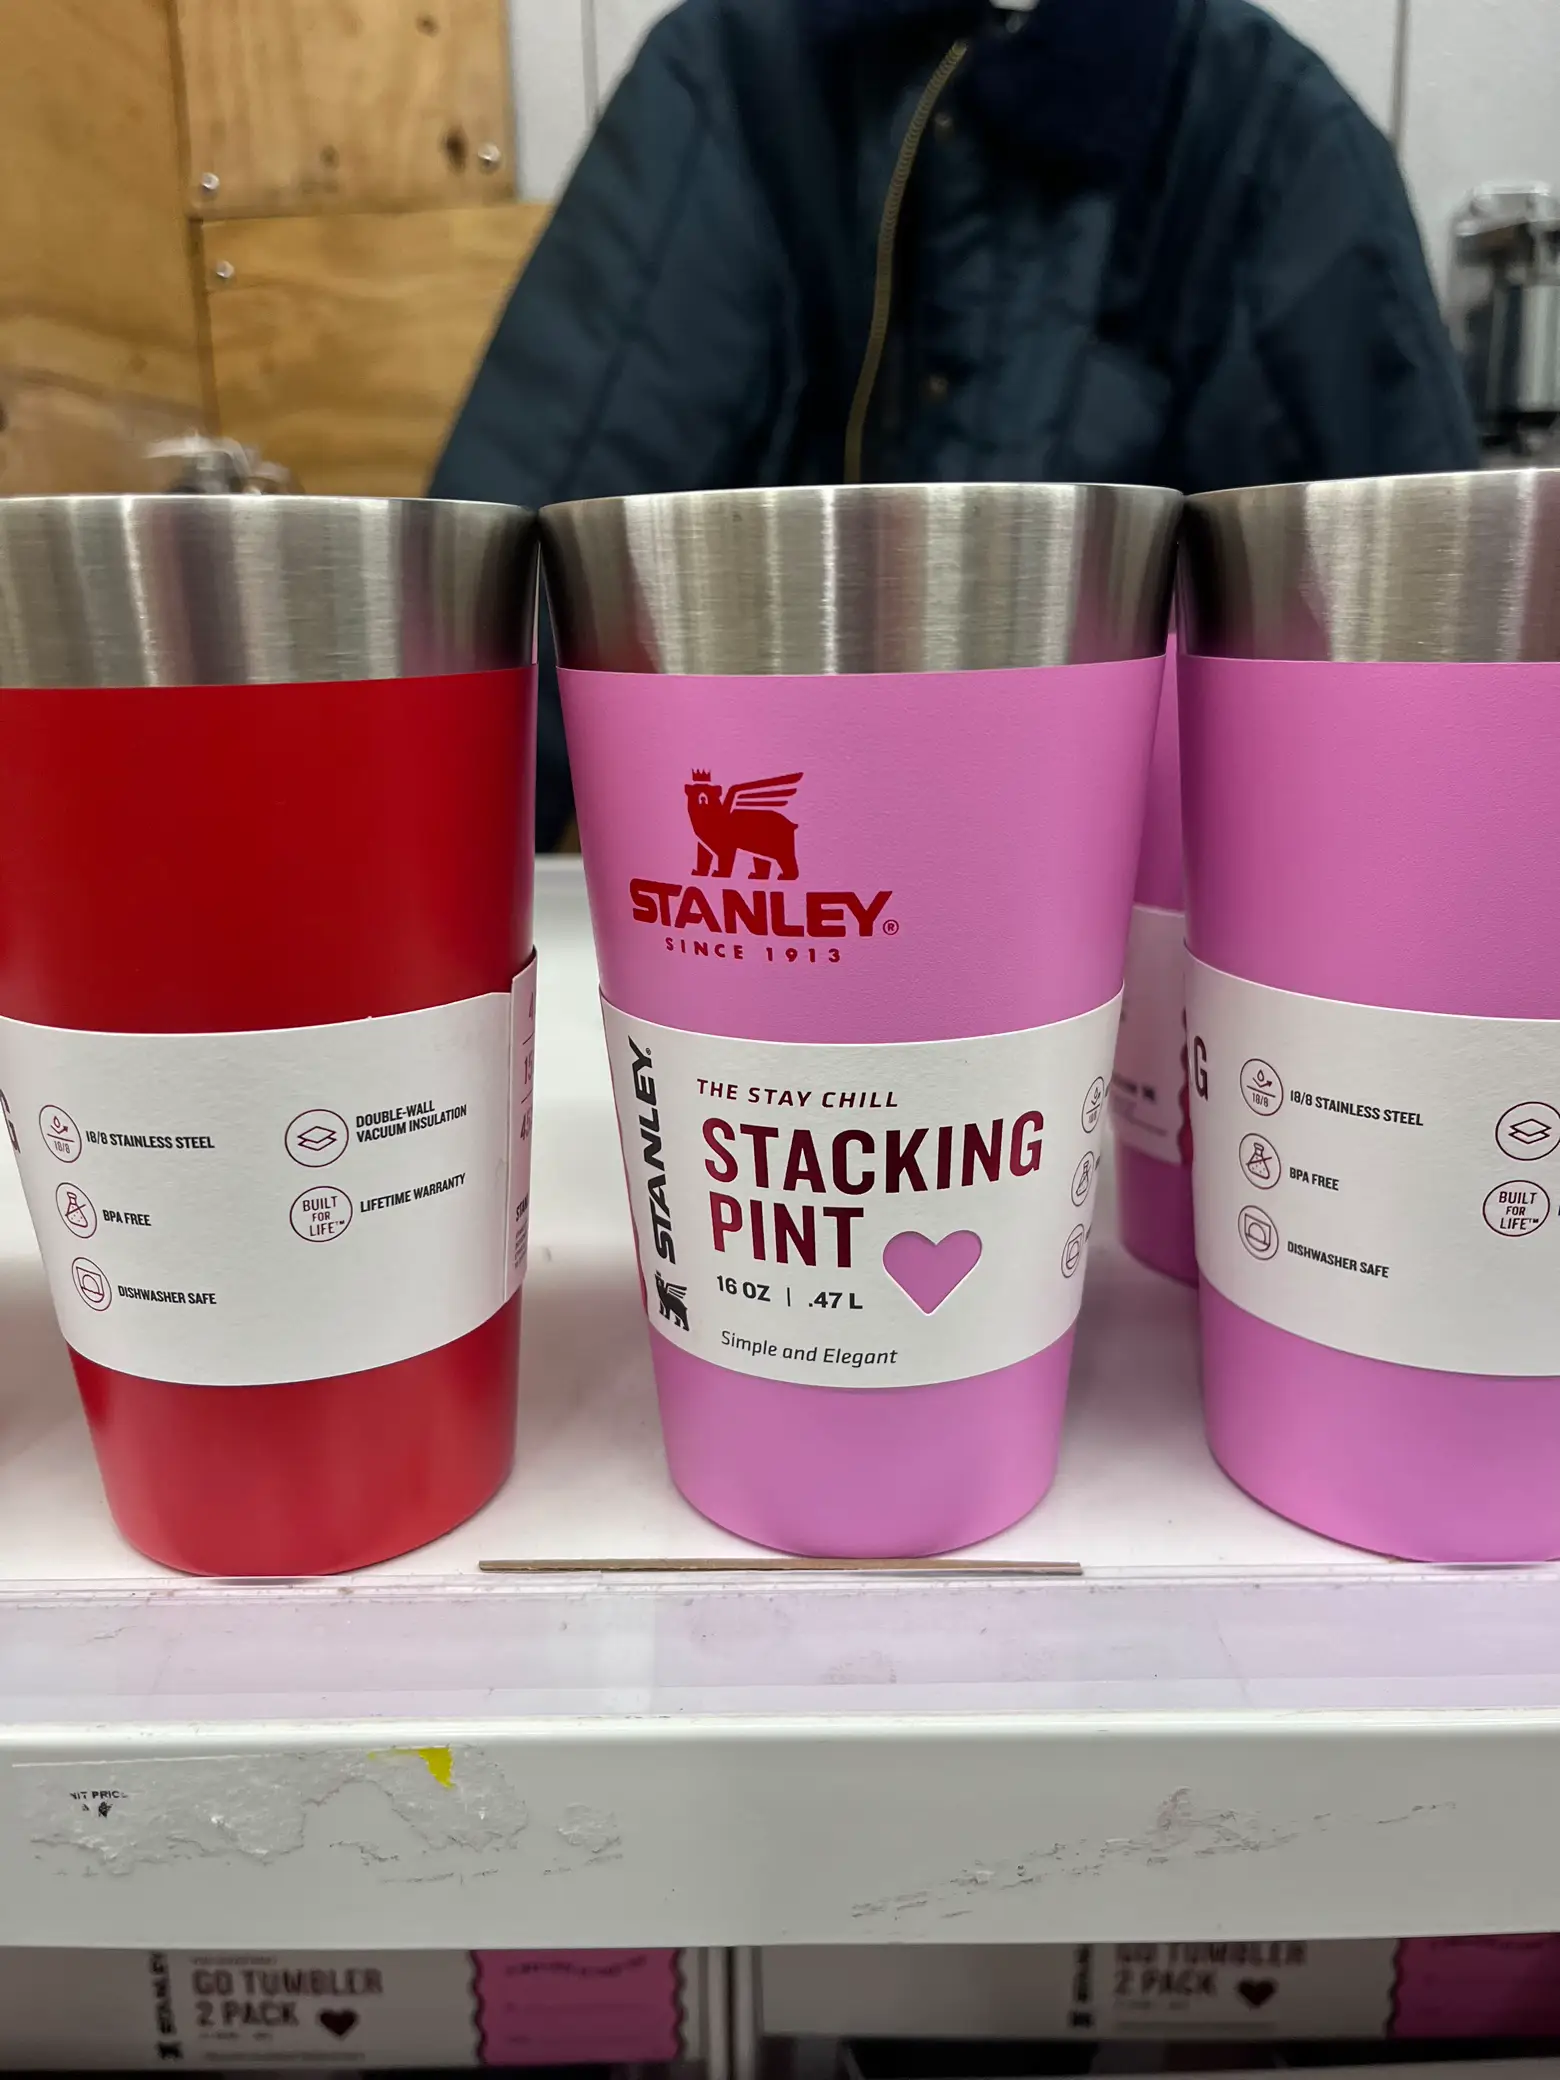 Check out these adorable @Stanley 1913 tumblers i found in neon